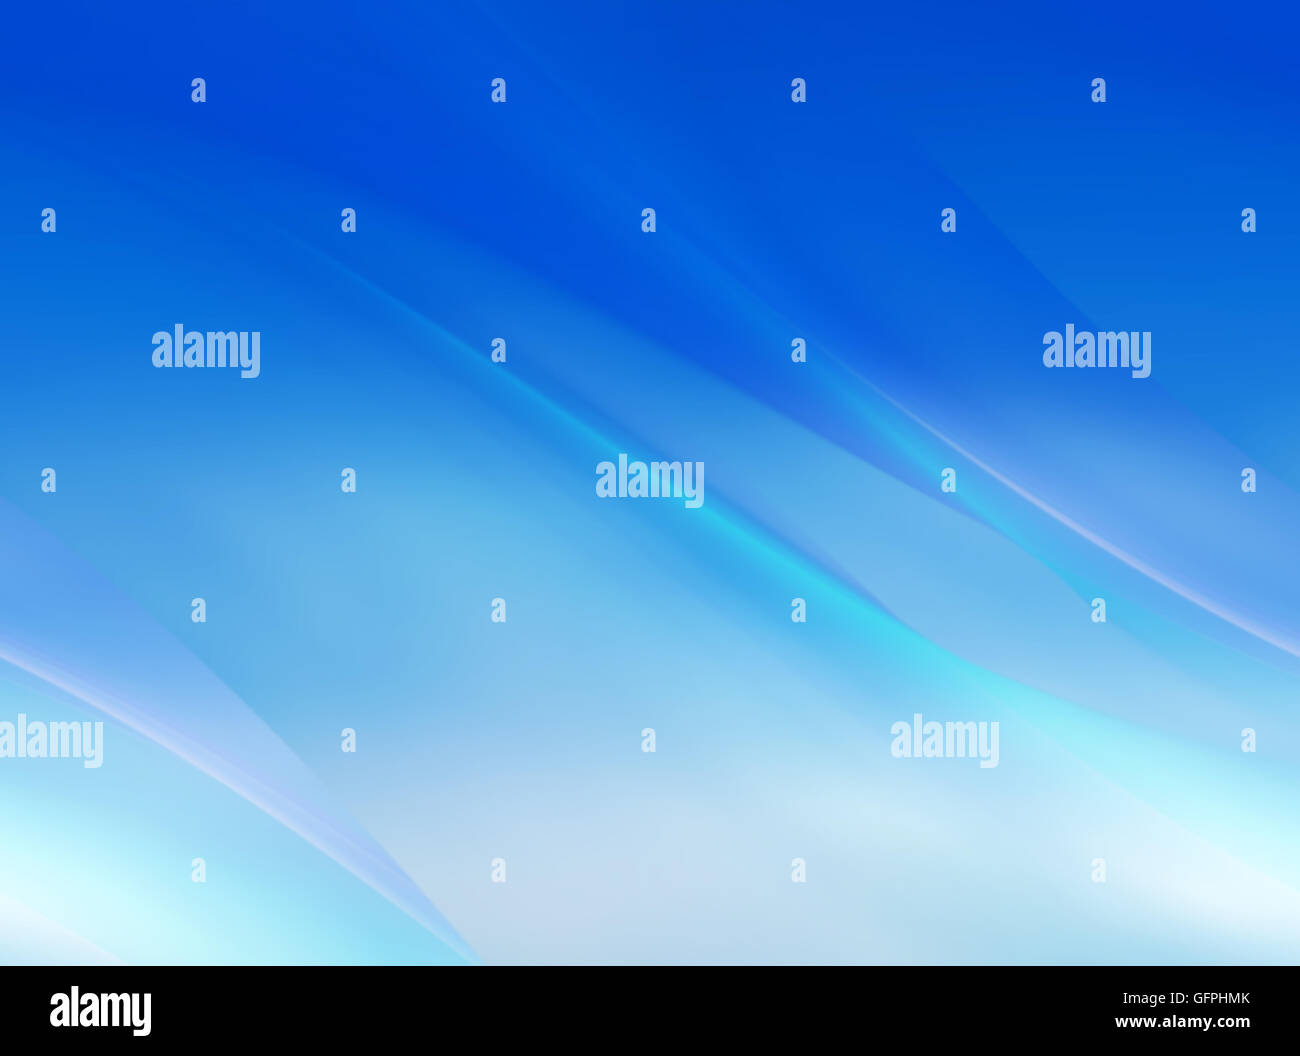 Abstract blue curved motion background Stock Photo